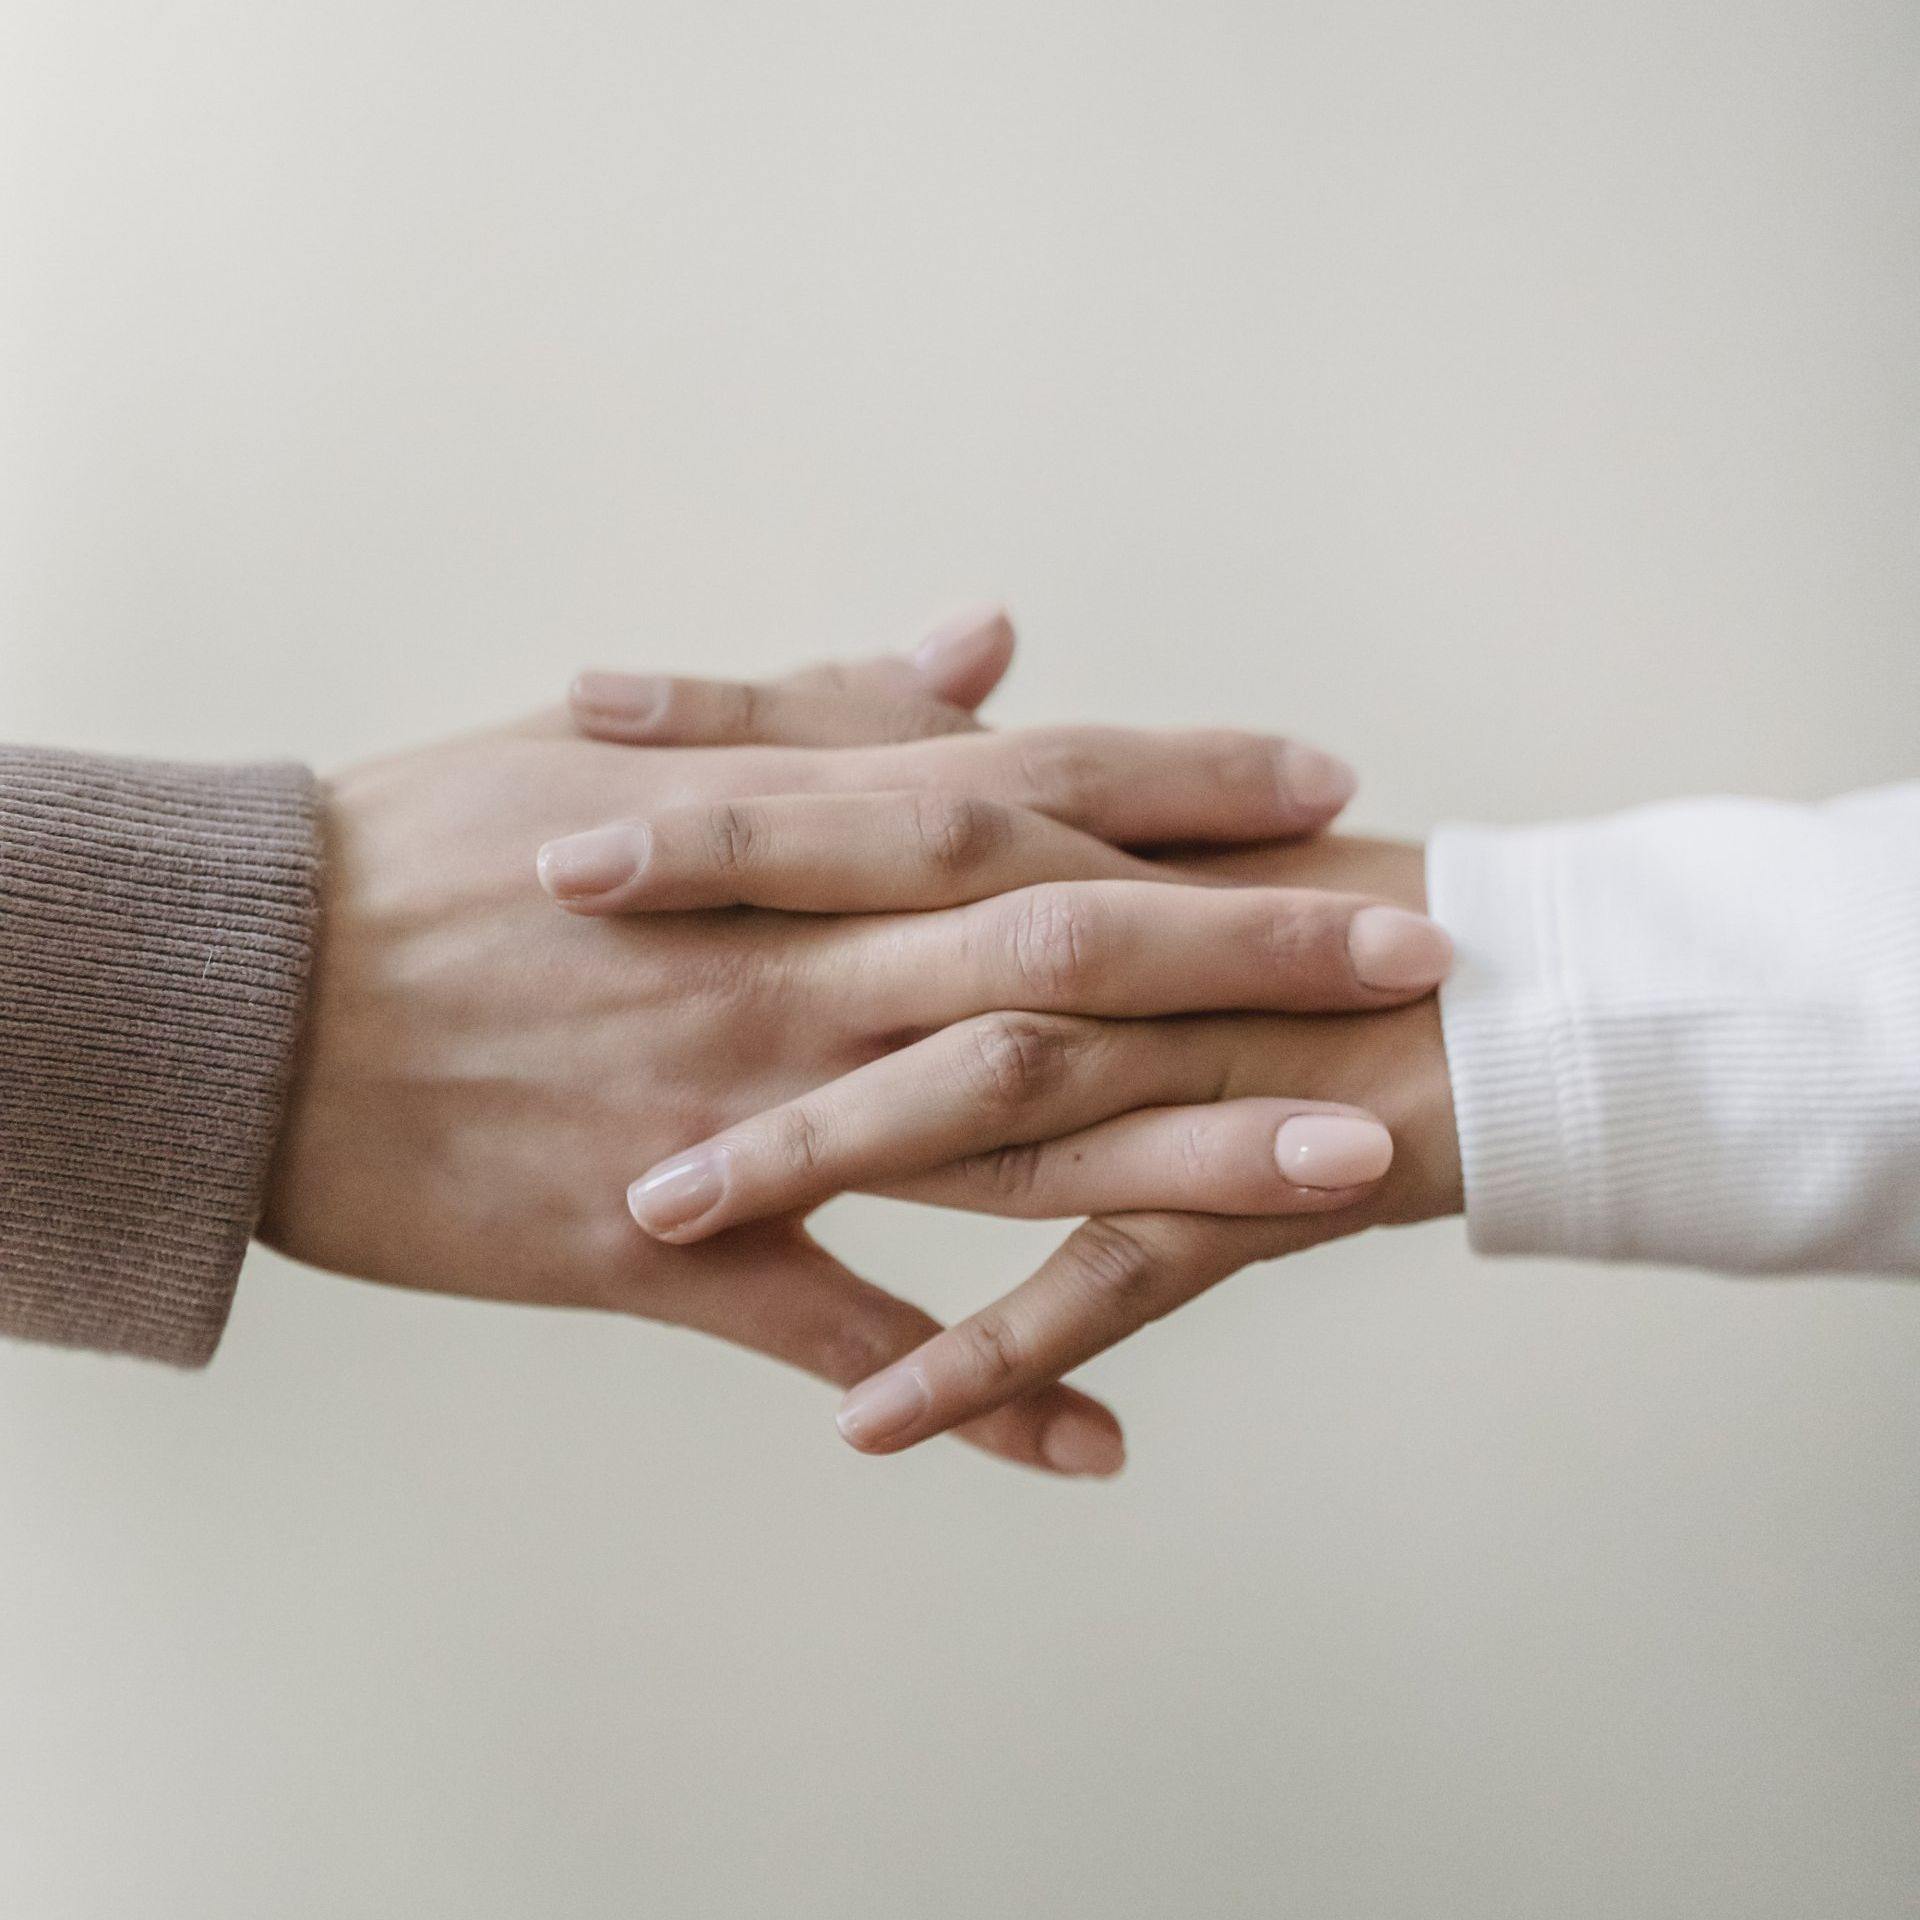 Two people holding hands with intertwined fingers.